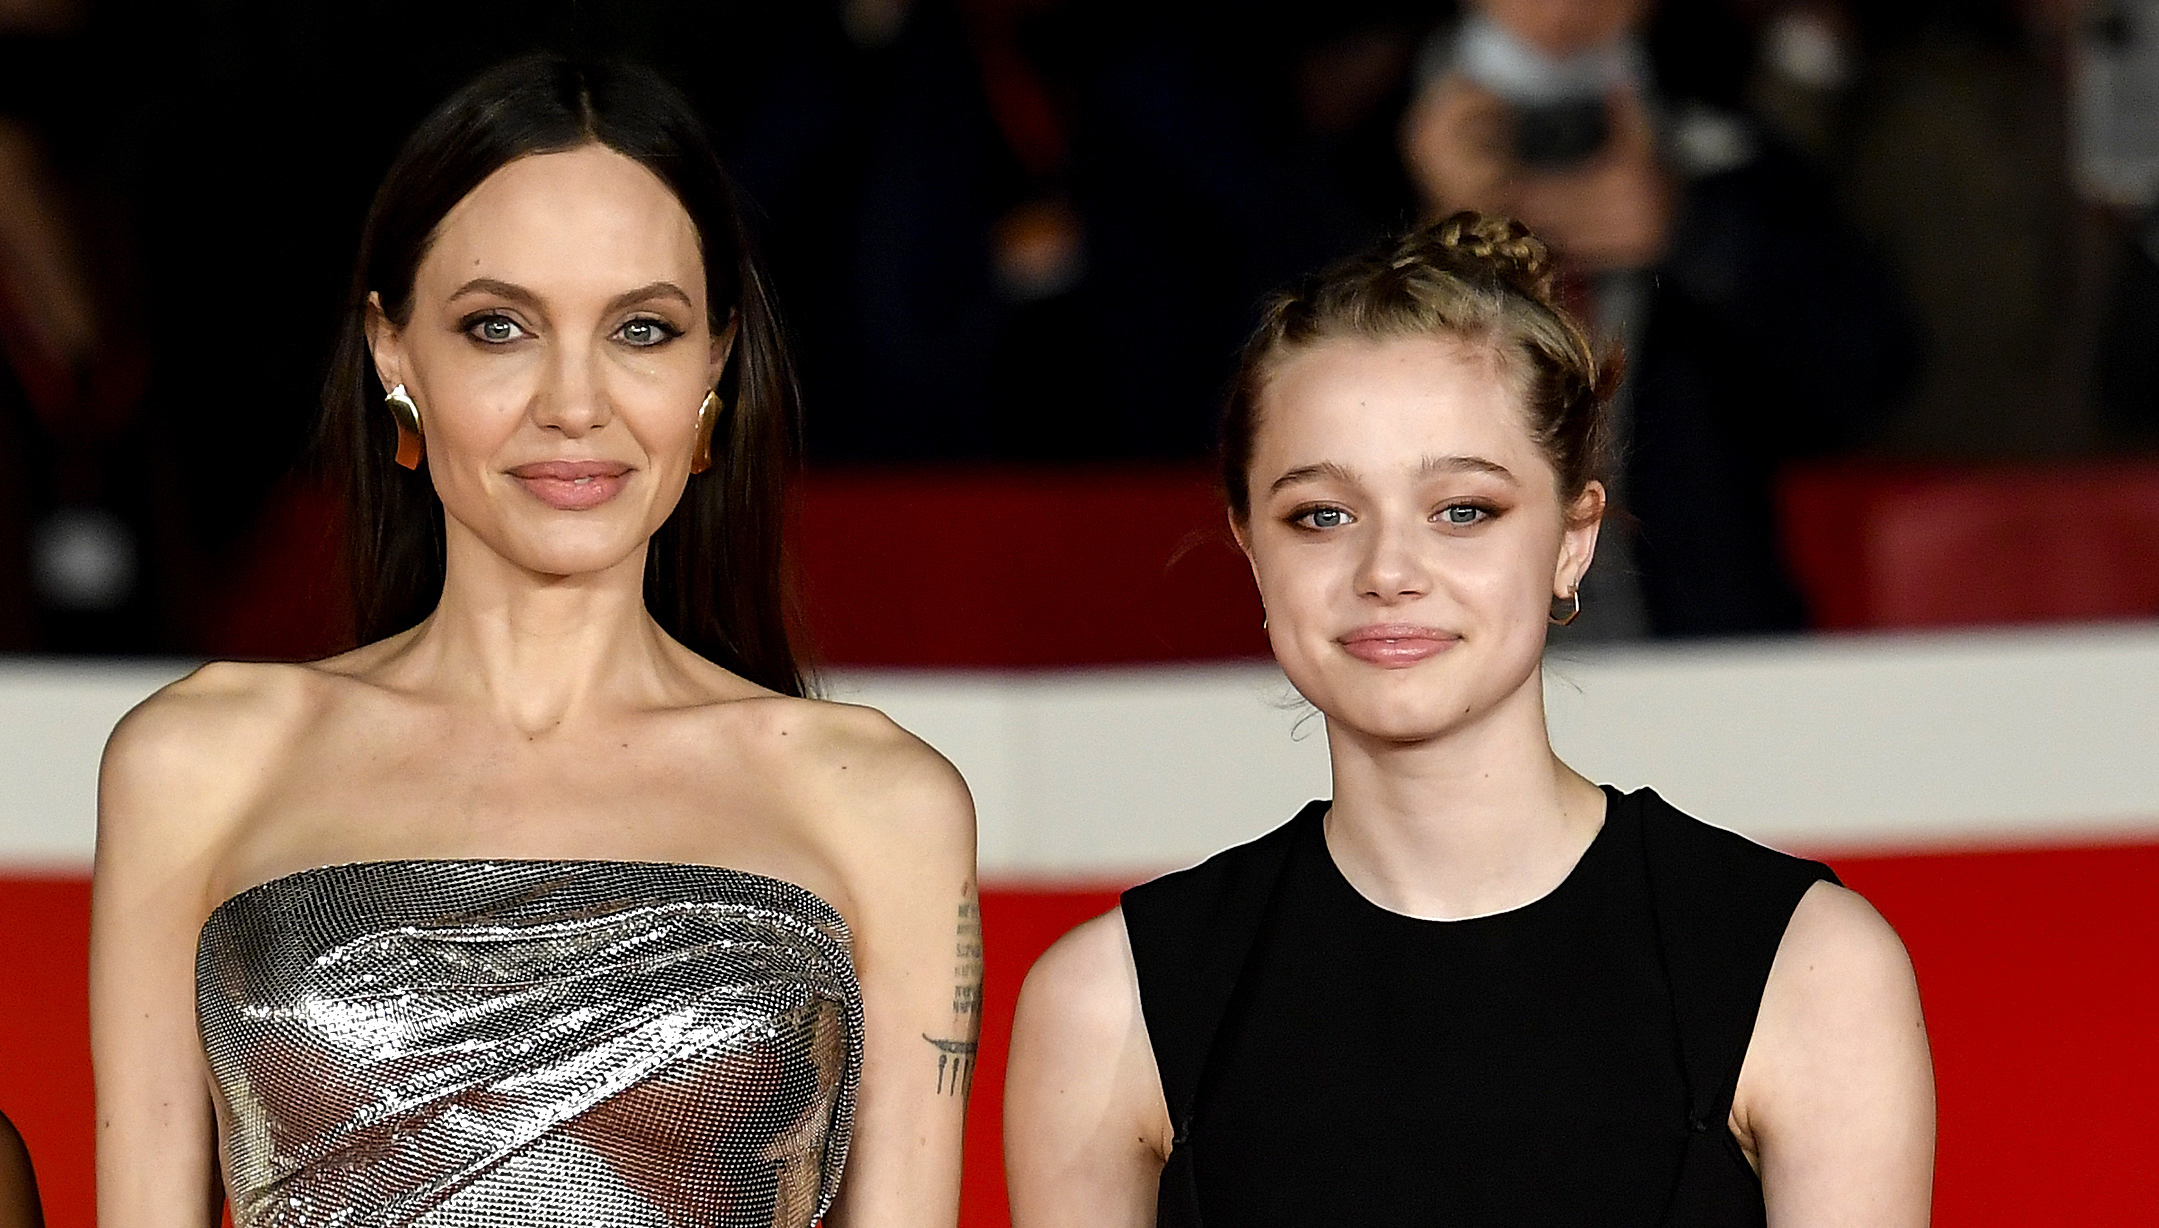 Angelina Jolie and Brad Pitt’s daughter requests removal of Pitt from surname